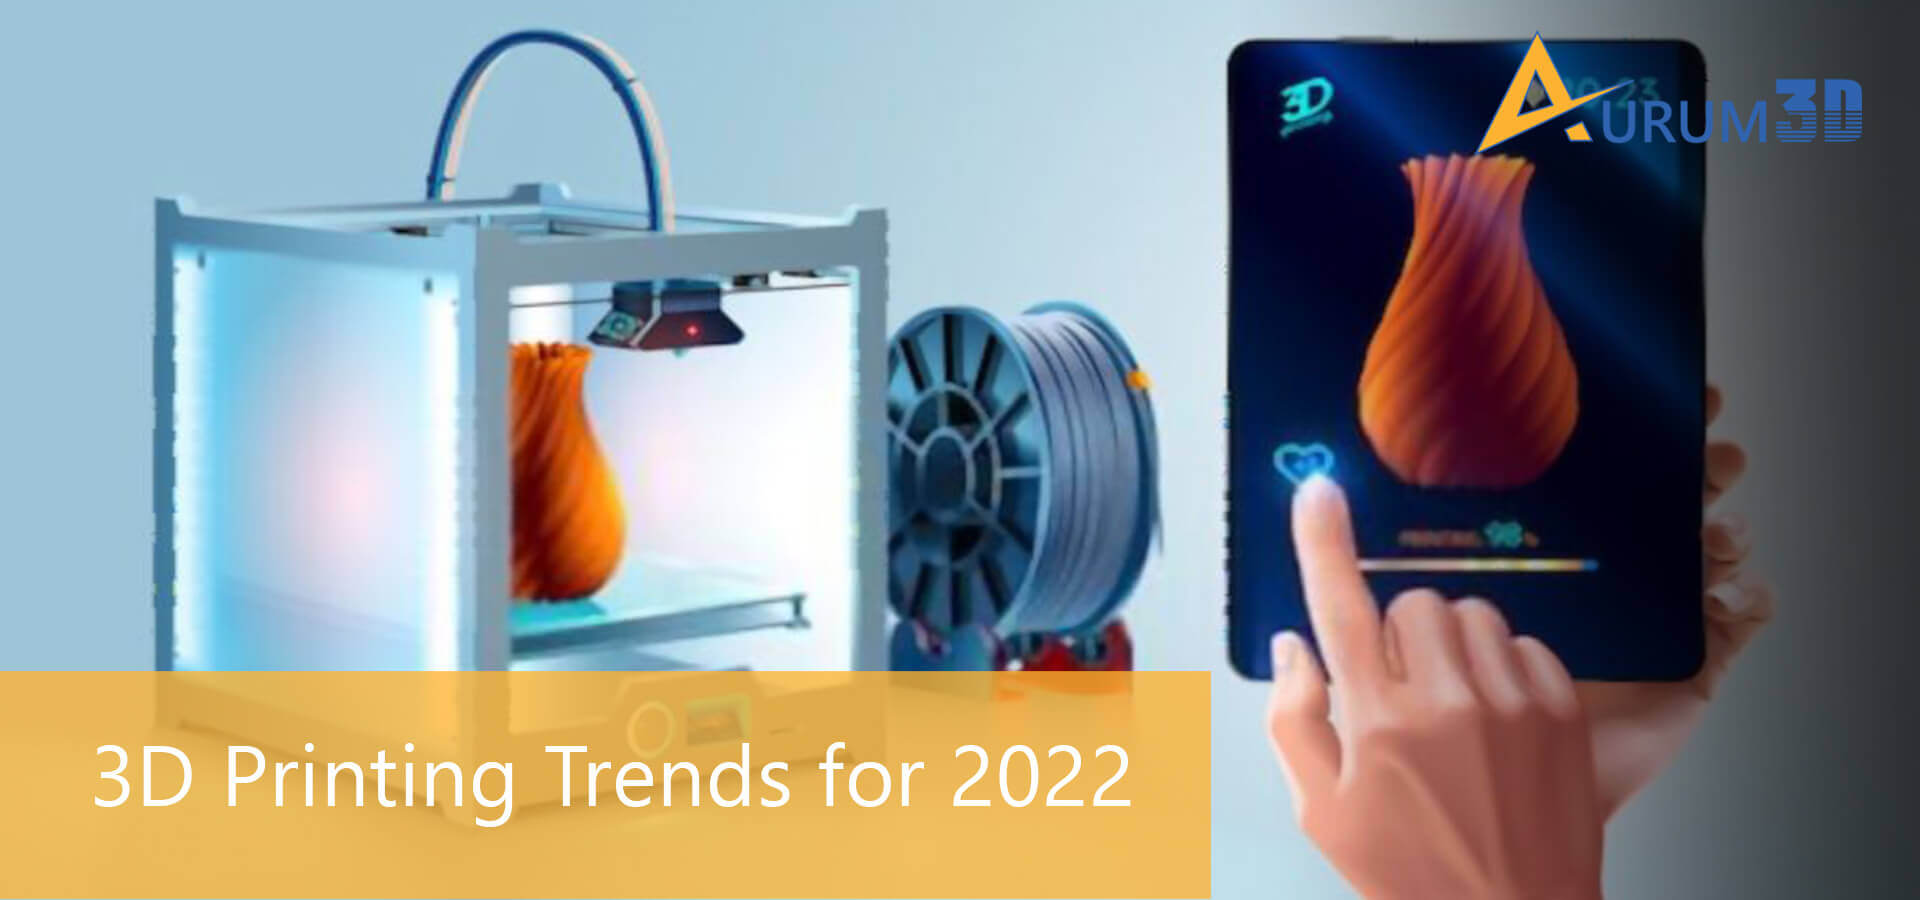 3D Printing Trends for 2022